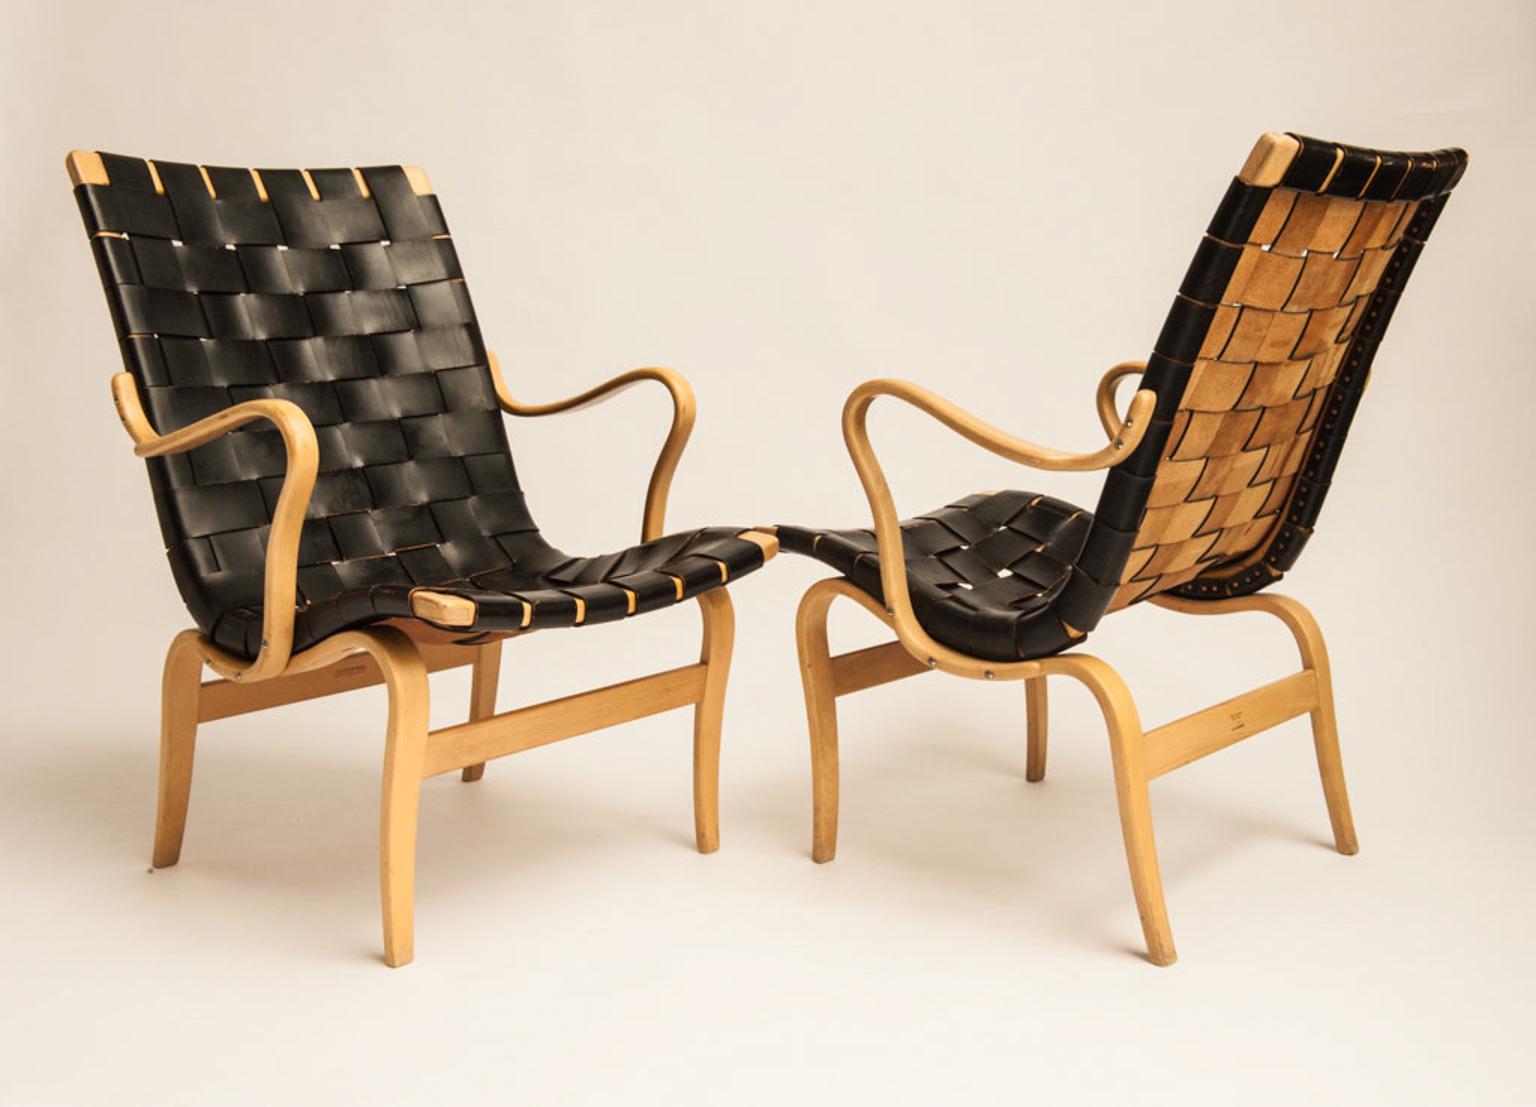 The set of two Eva Lounge chairs is designed by Bruno Mathsson in 1935, and produced by company Karl Mathsson in the 1960s. They are made from molded beech with saddle girth in black harness leather.